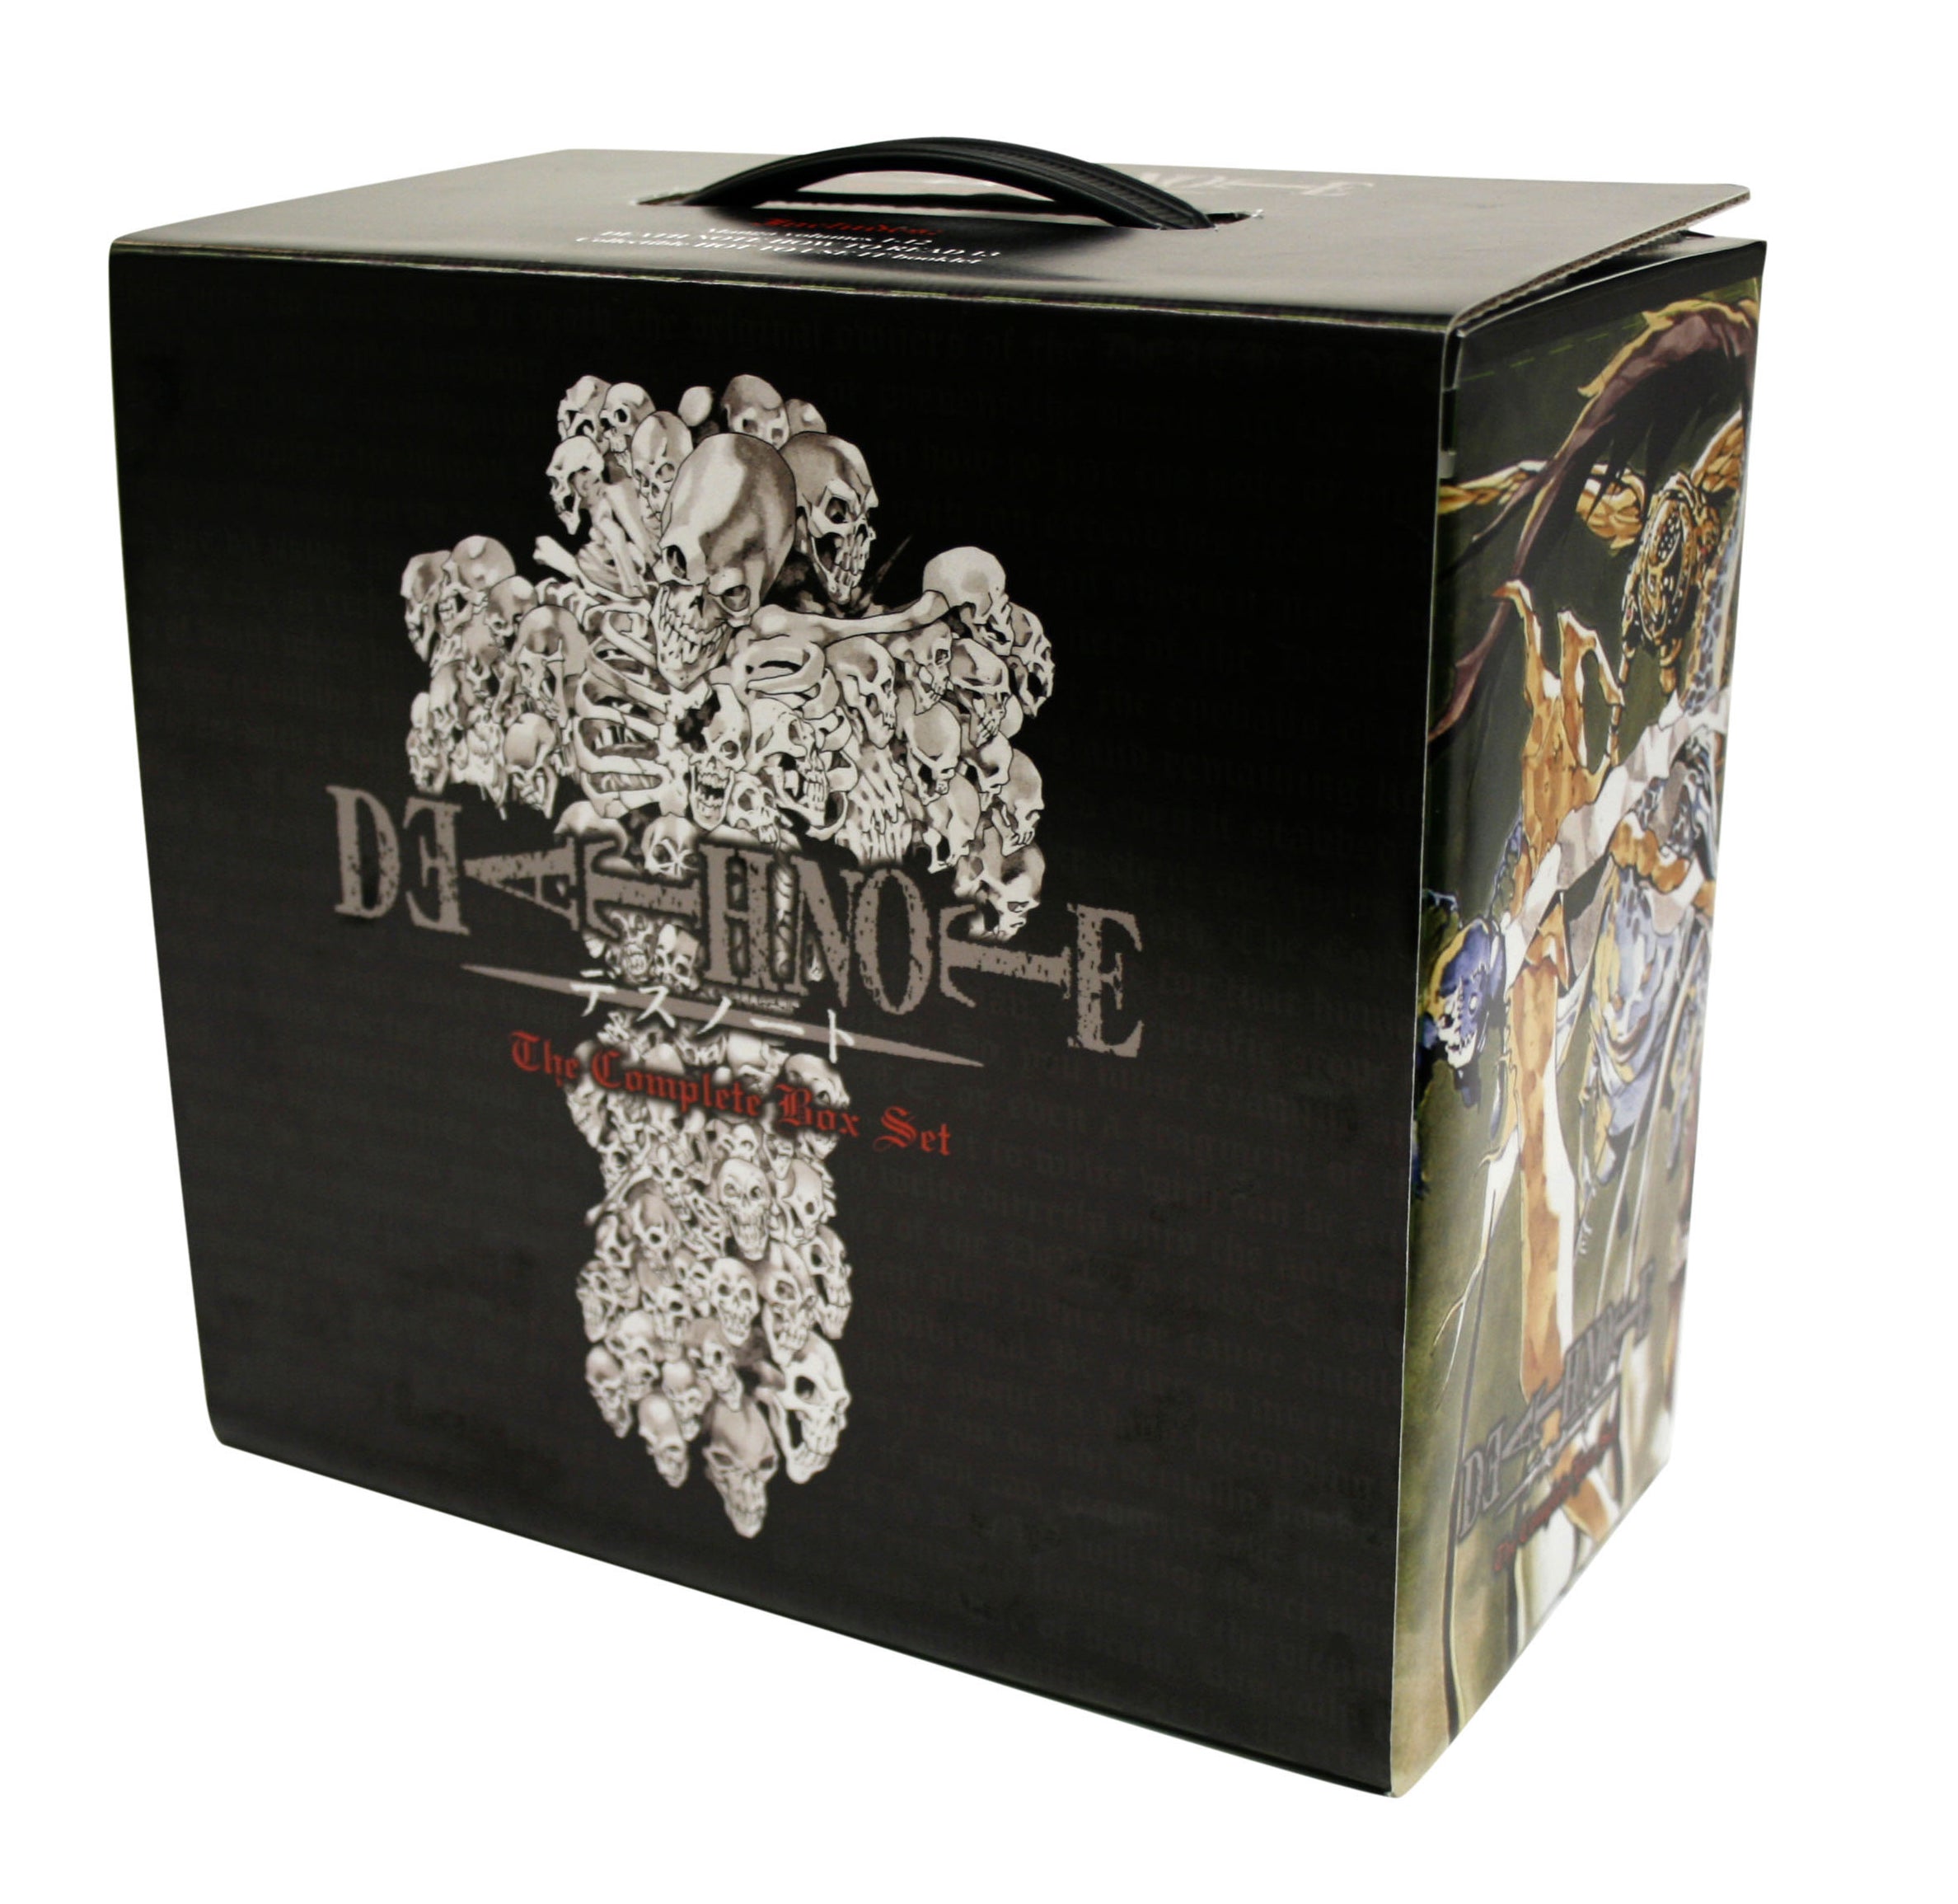 Death Note Complete Box Set (A)